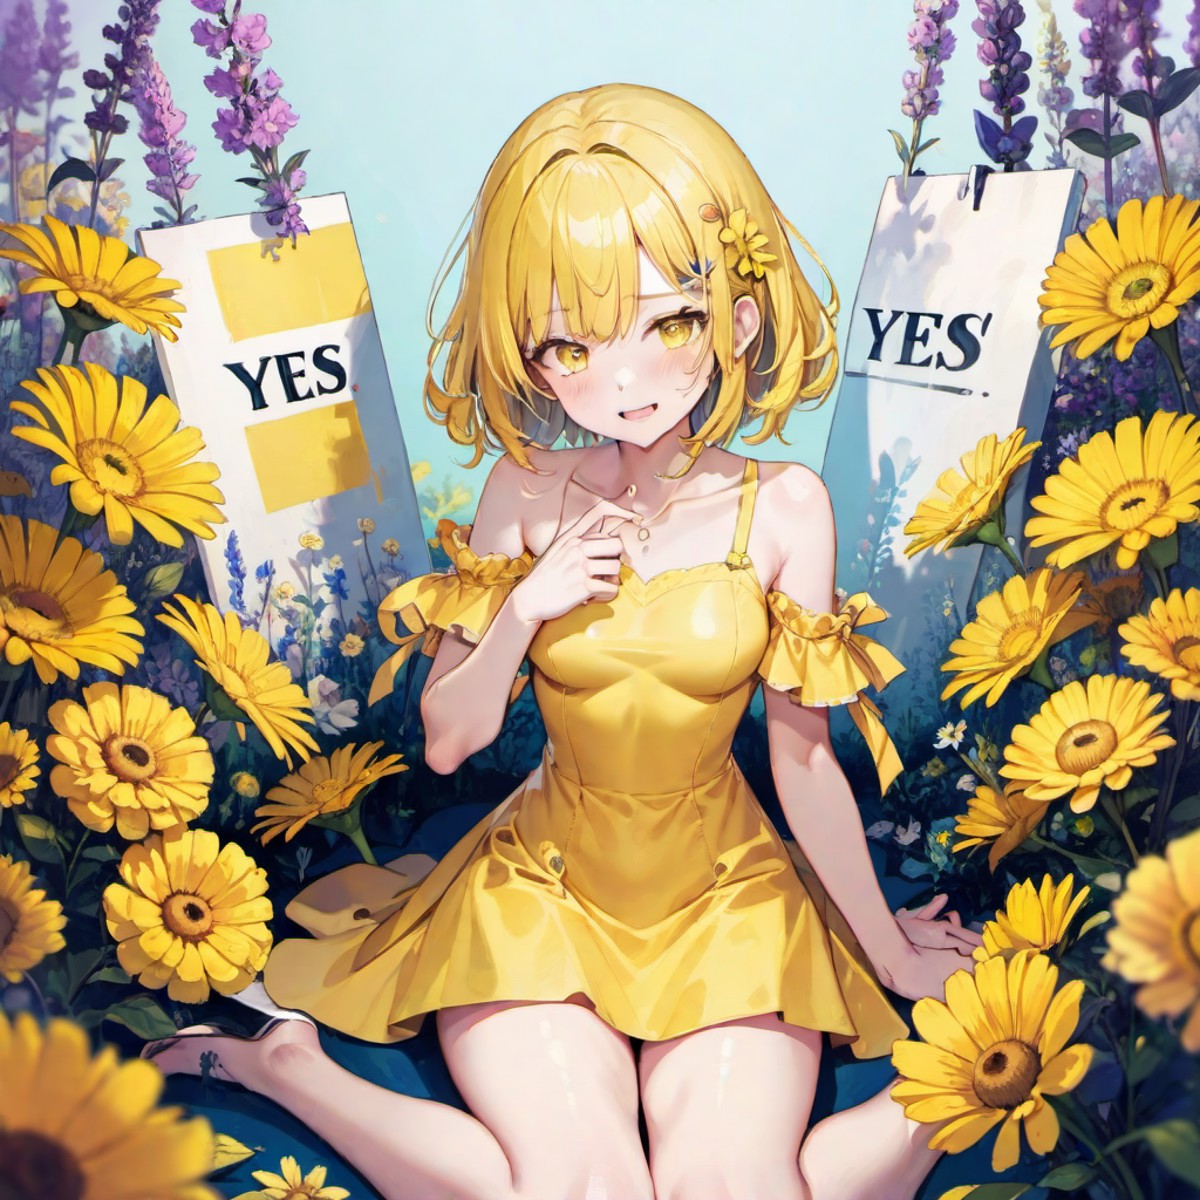 A girl in a yellow dress,Sitting among the flowers,Holding a sign,It says' YES',